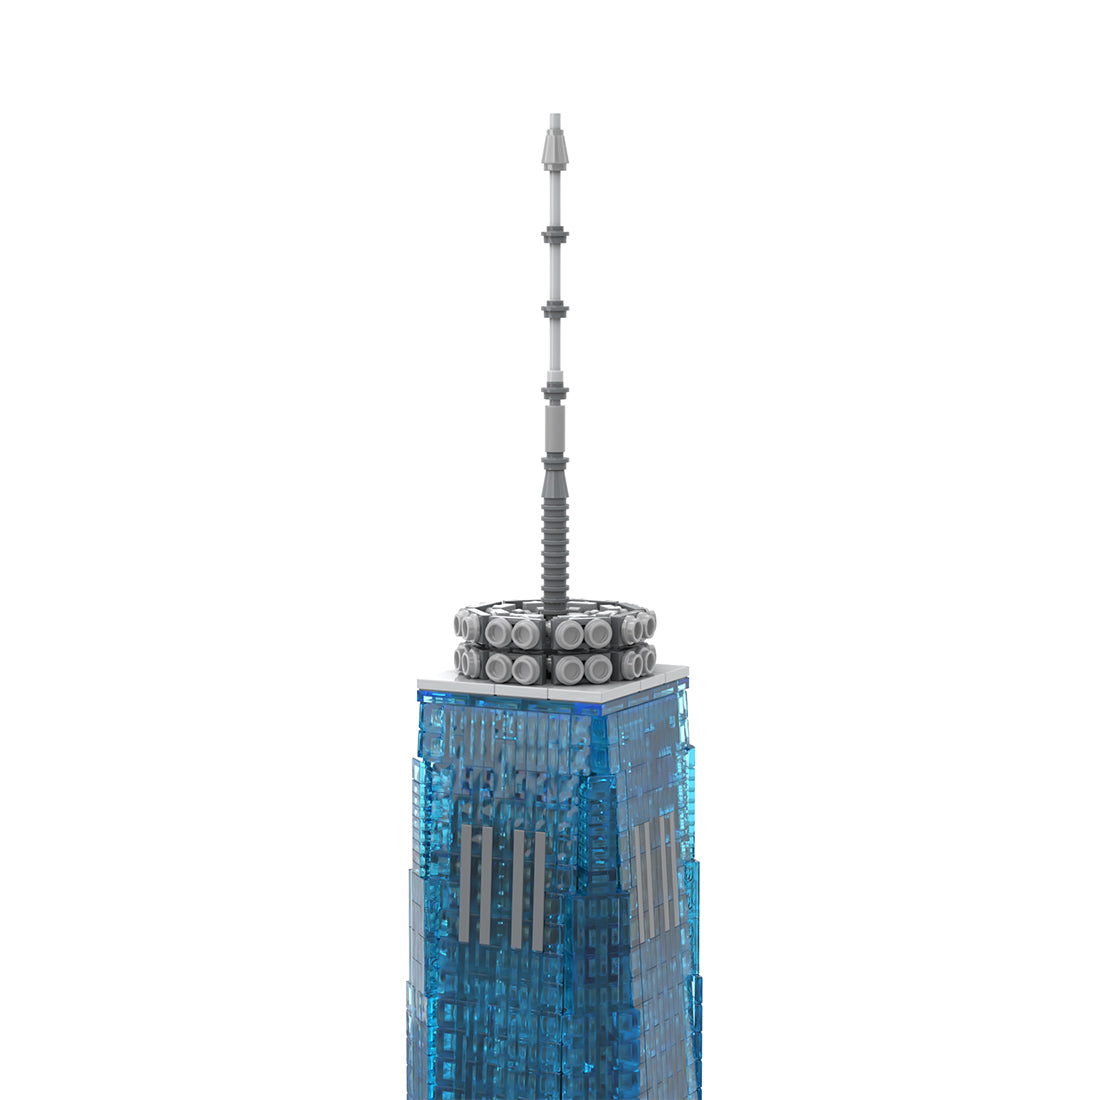 moc-159549-one-world-trade-center-1-800-scale